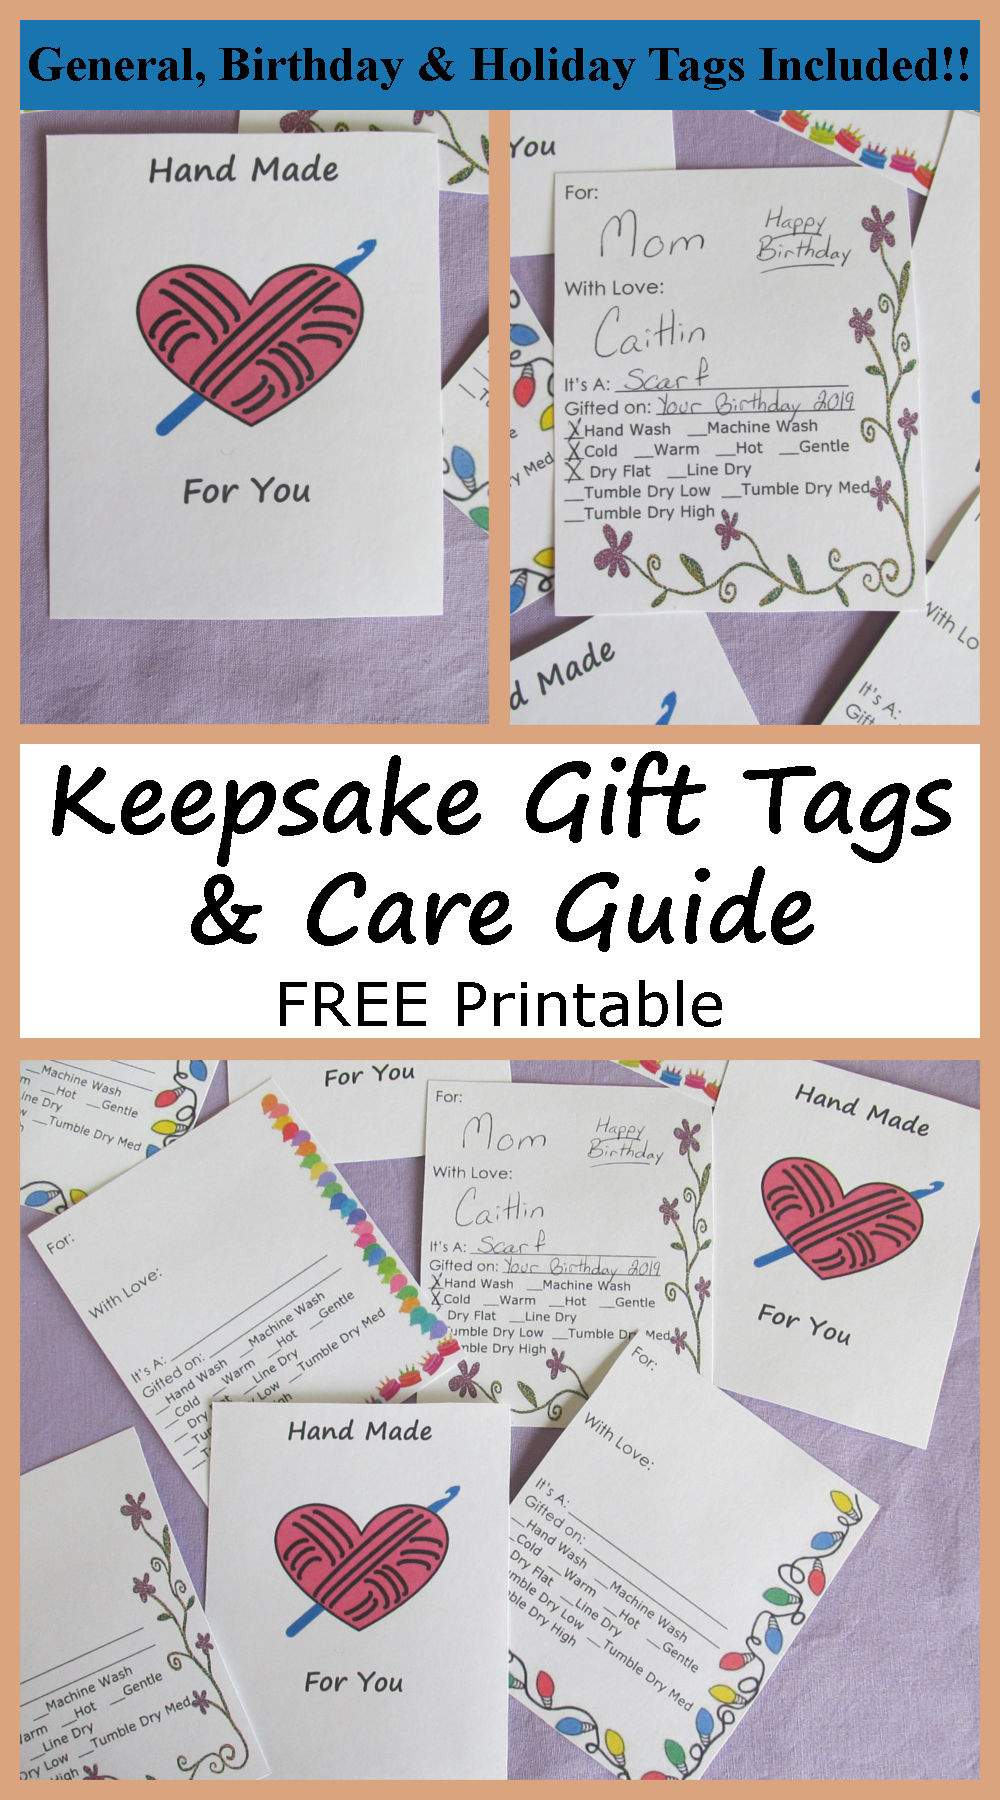 Keepsake Gift Tag and Care Guide Free Printable from Caitlin's Contagious Creations. General gift, birthday present and holiday gift tags included